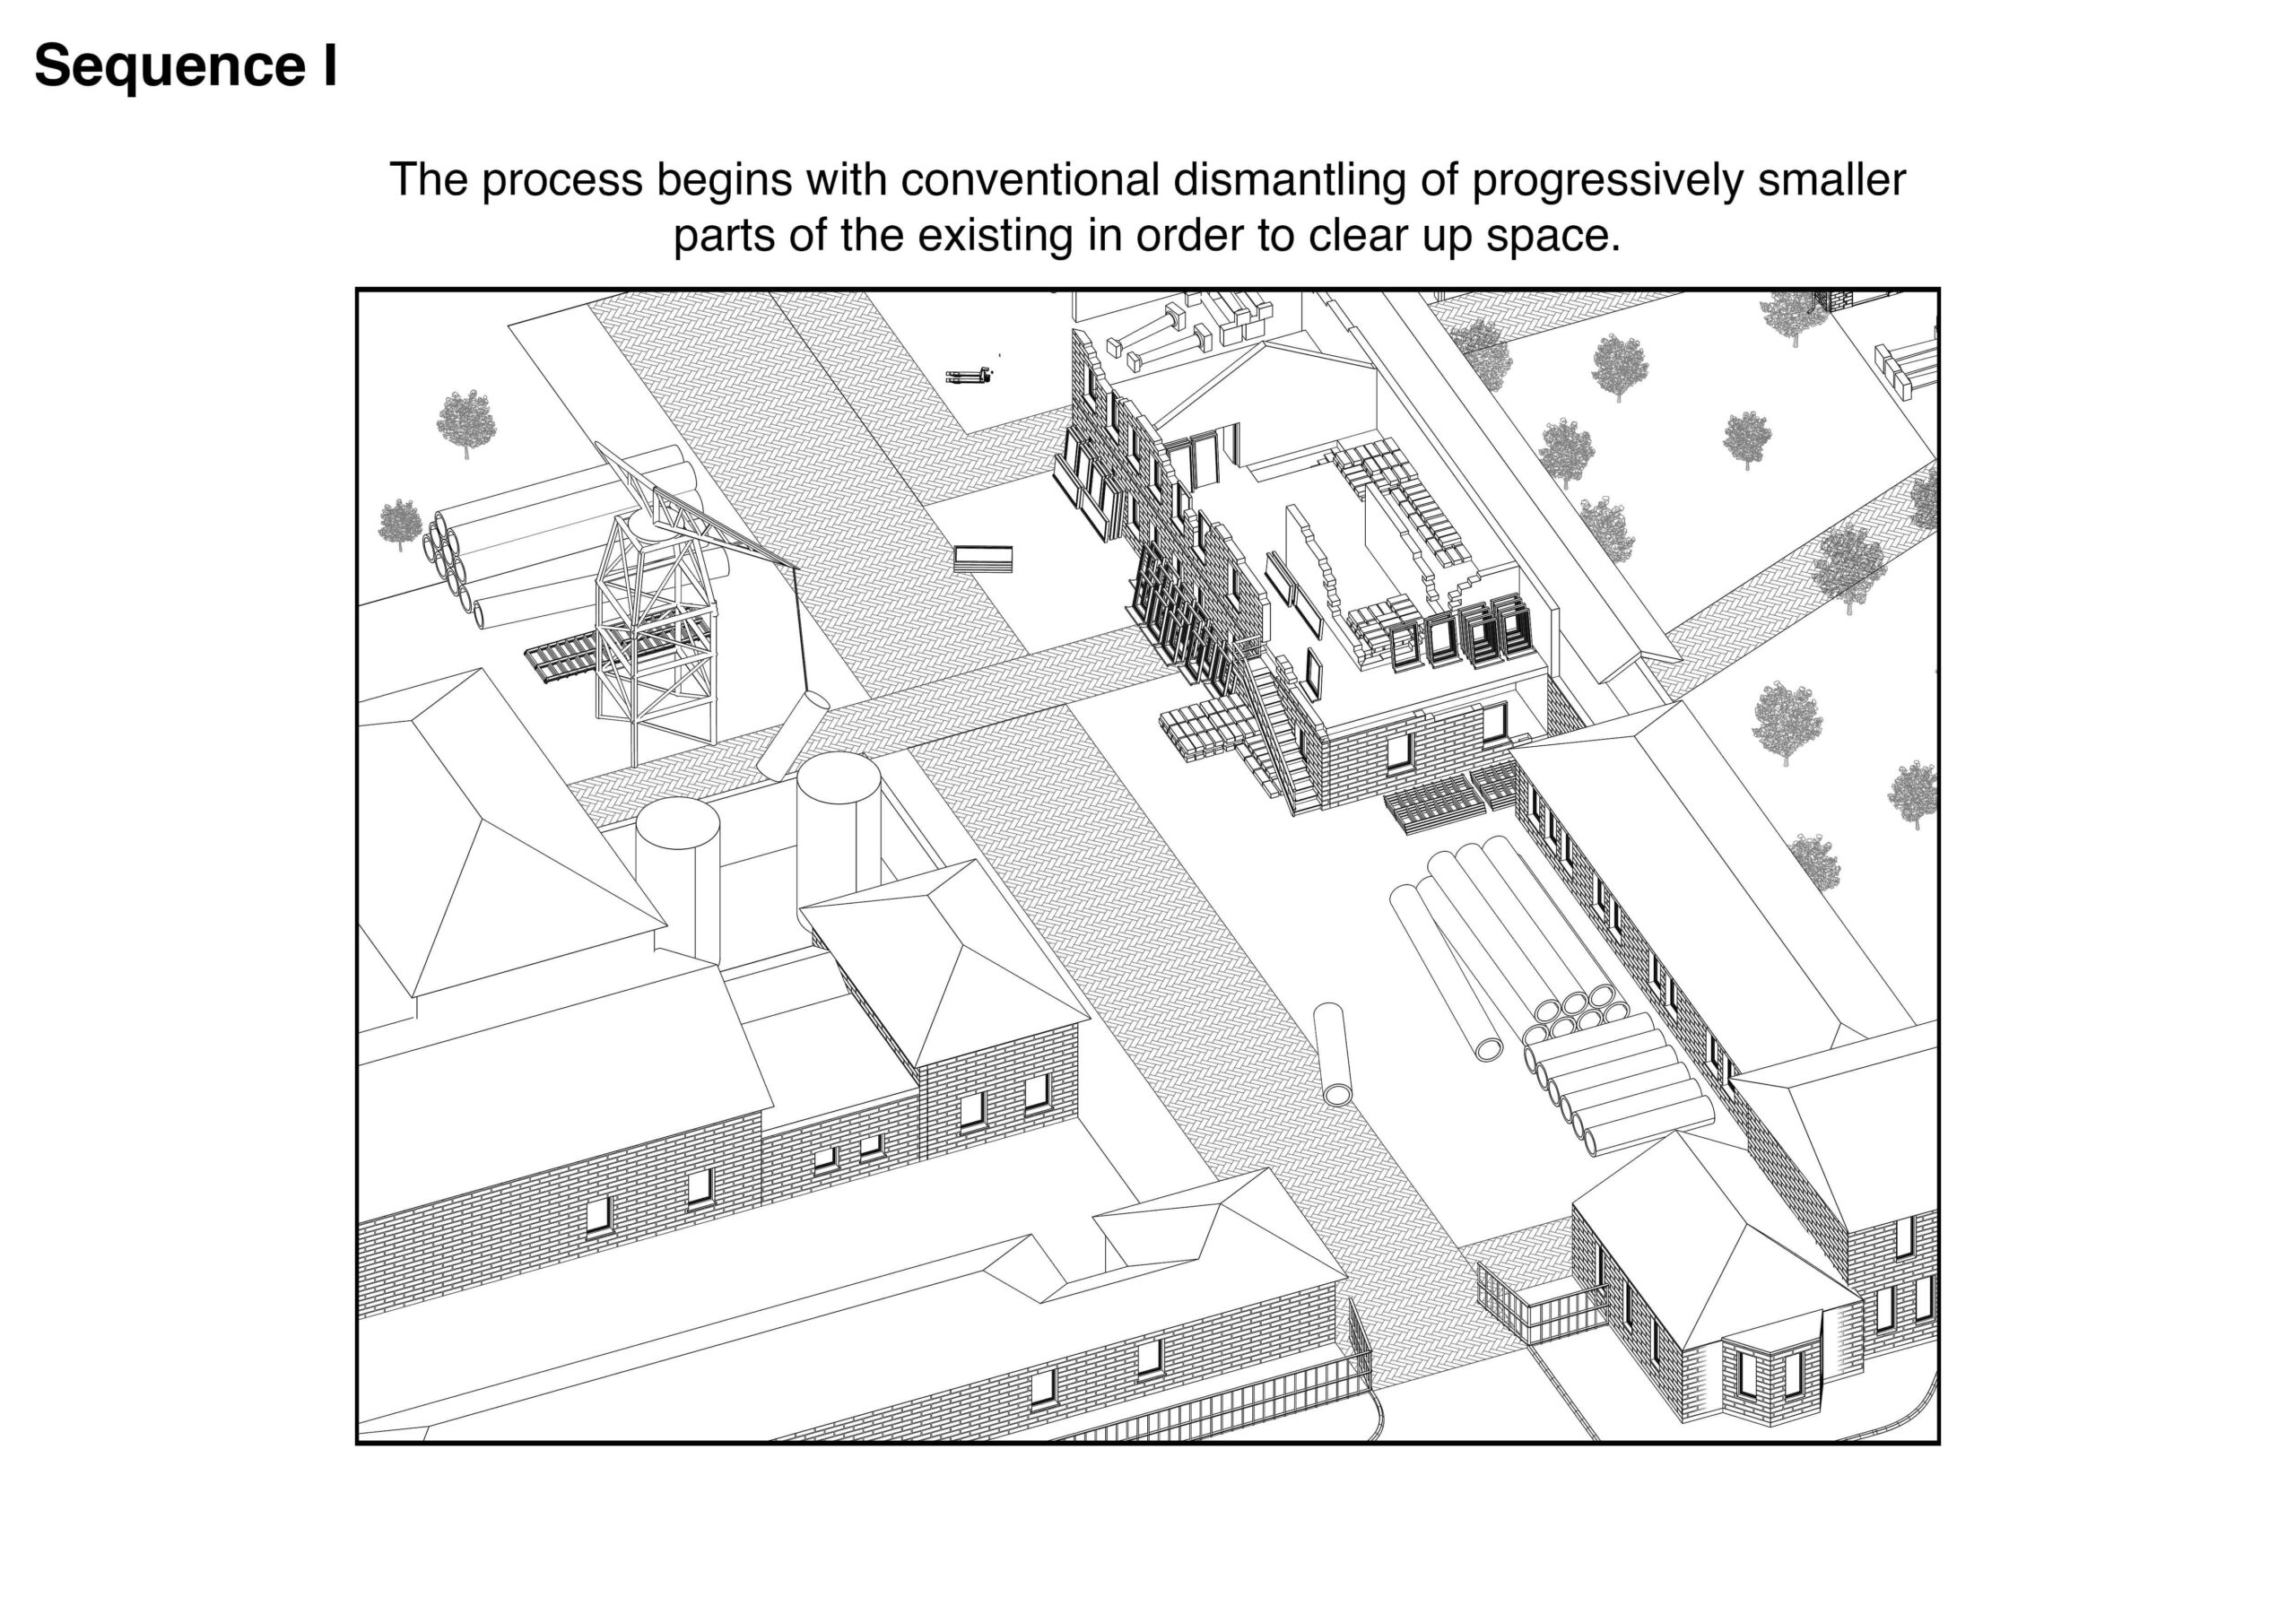 Portfolio Page of an axonometric drawing that shows the first stage of the process, beginning with the conventional dismantling of smaller parts of the existing in order to clear up space.